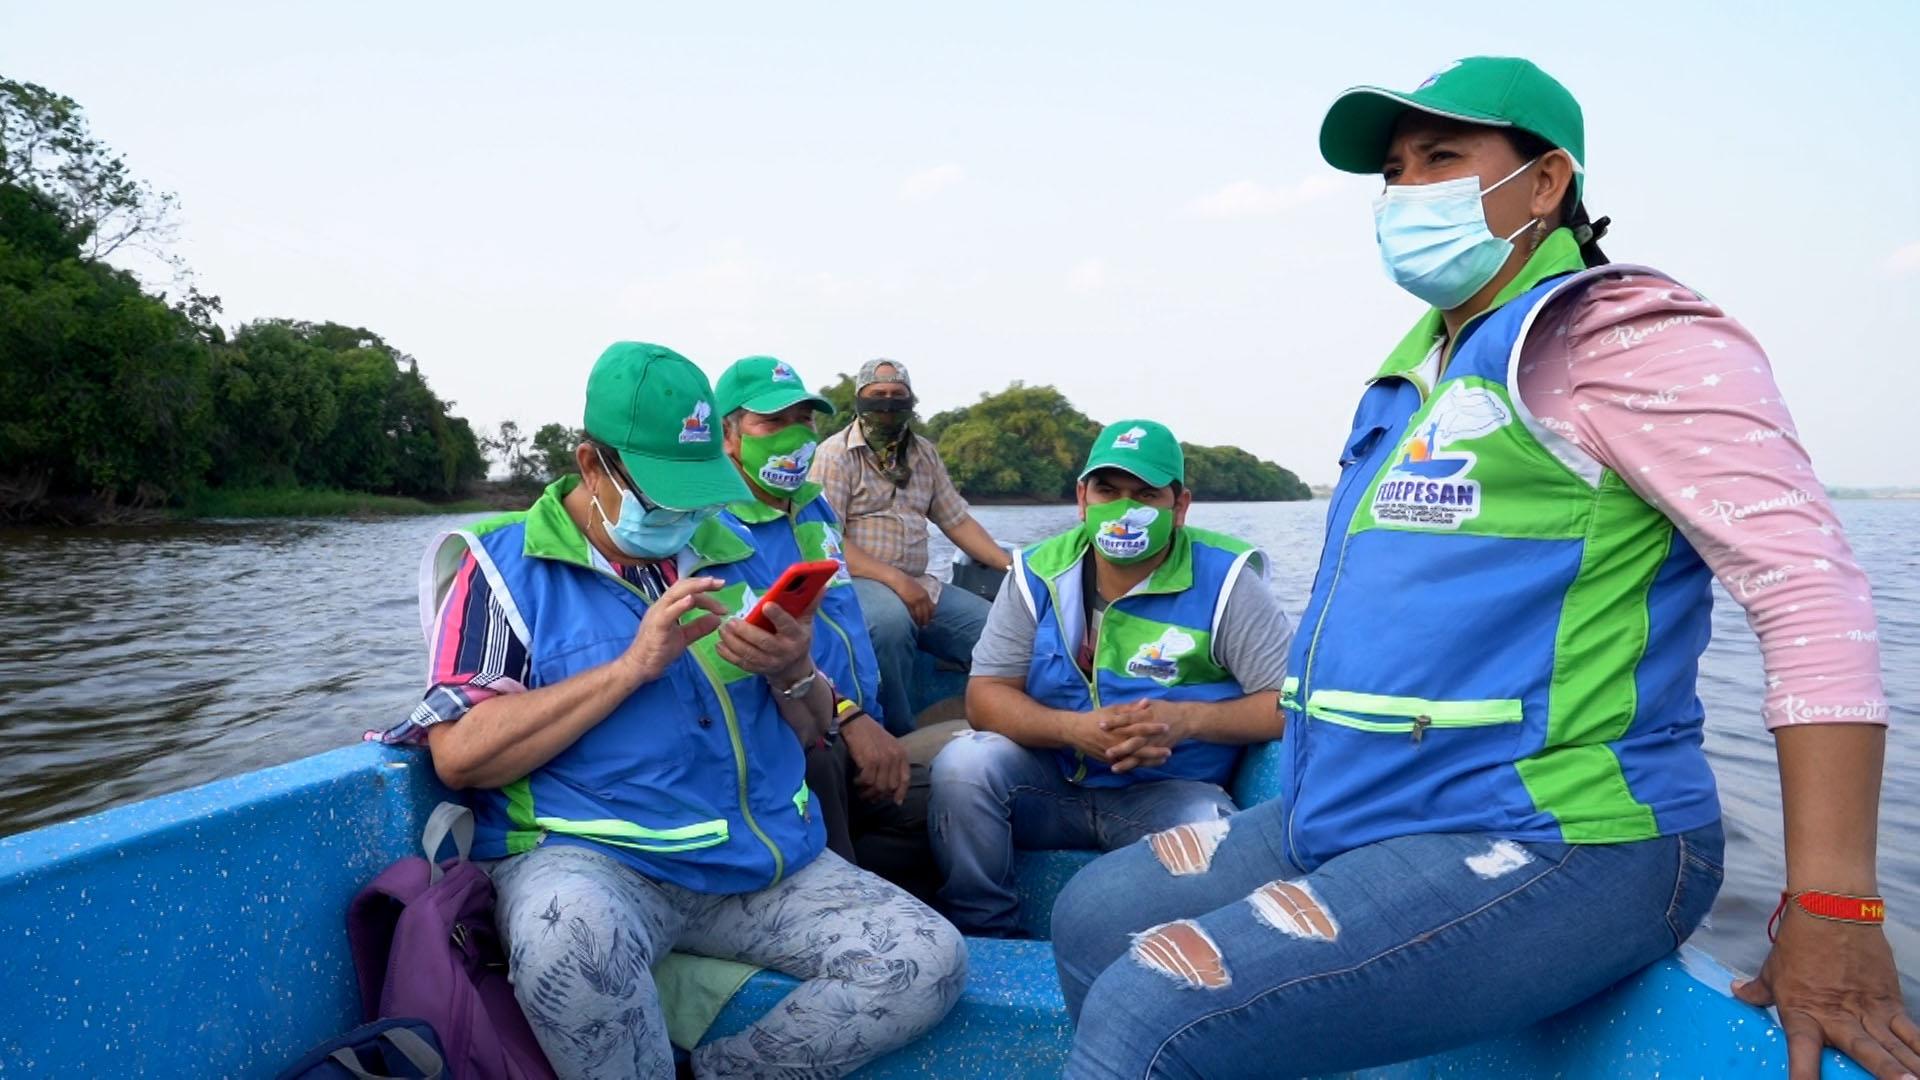 Four people wearing blue jackets and green caps ride in a boat on a lake. 